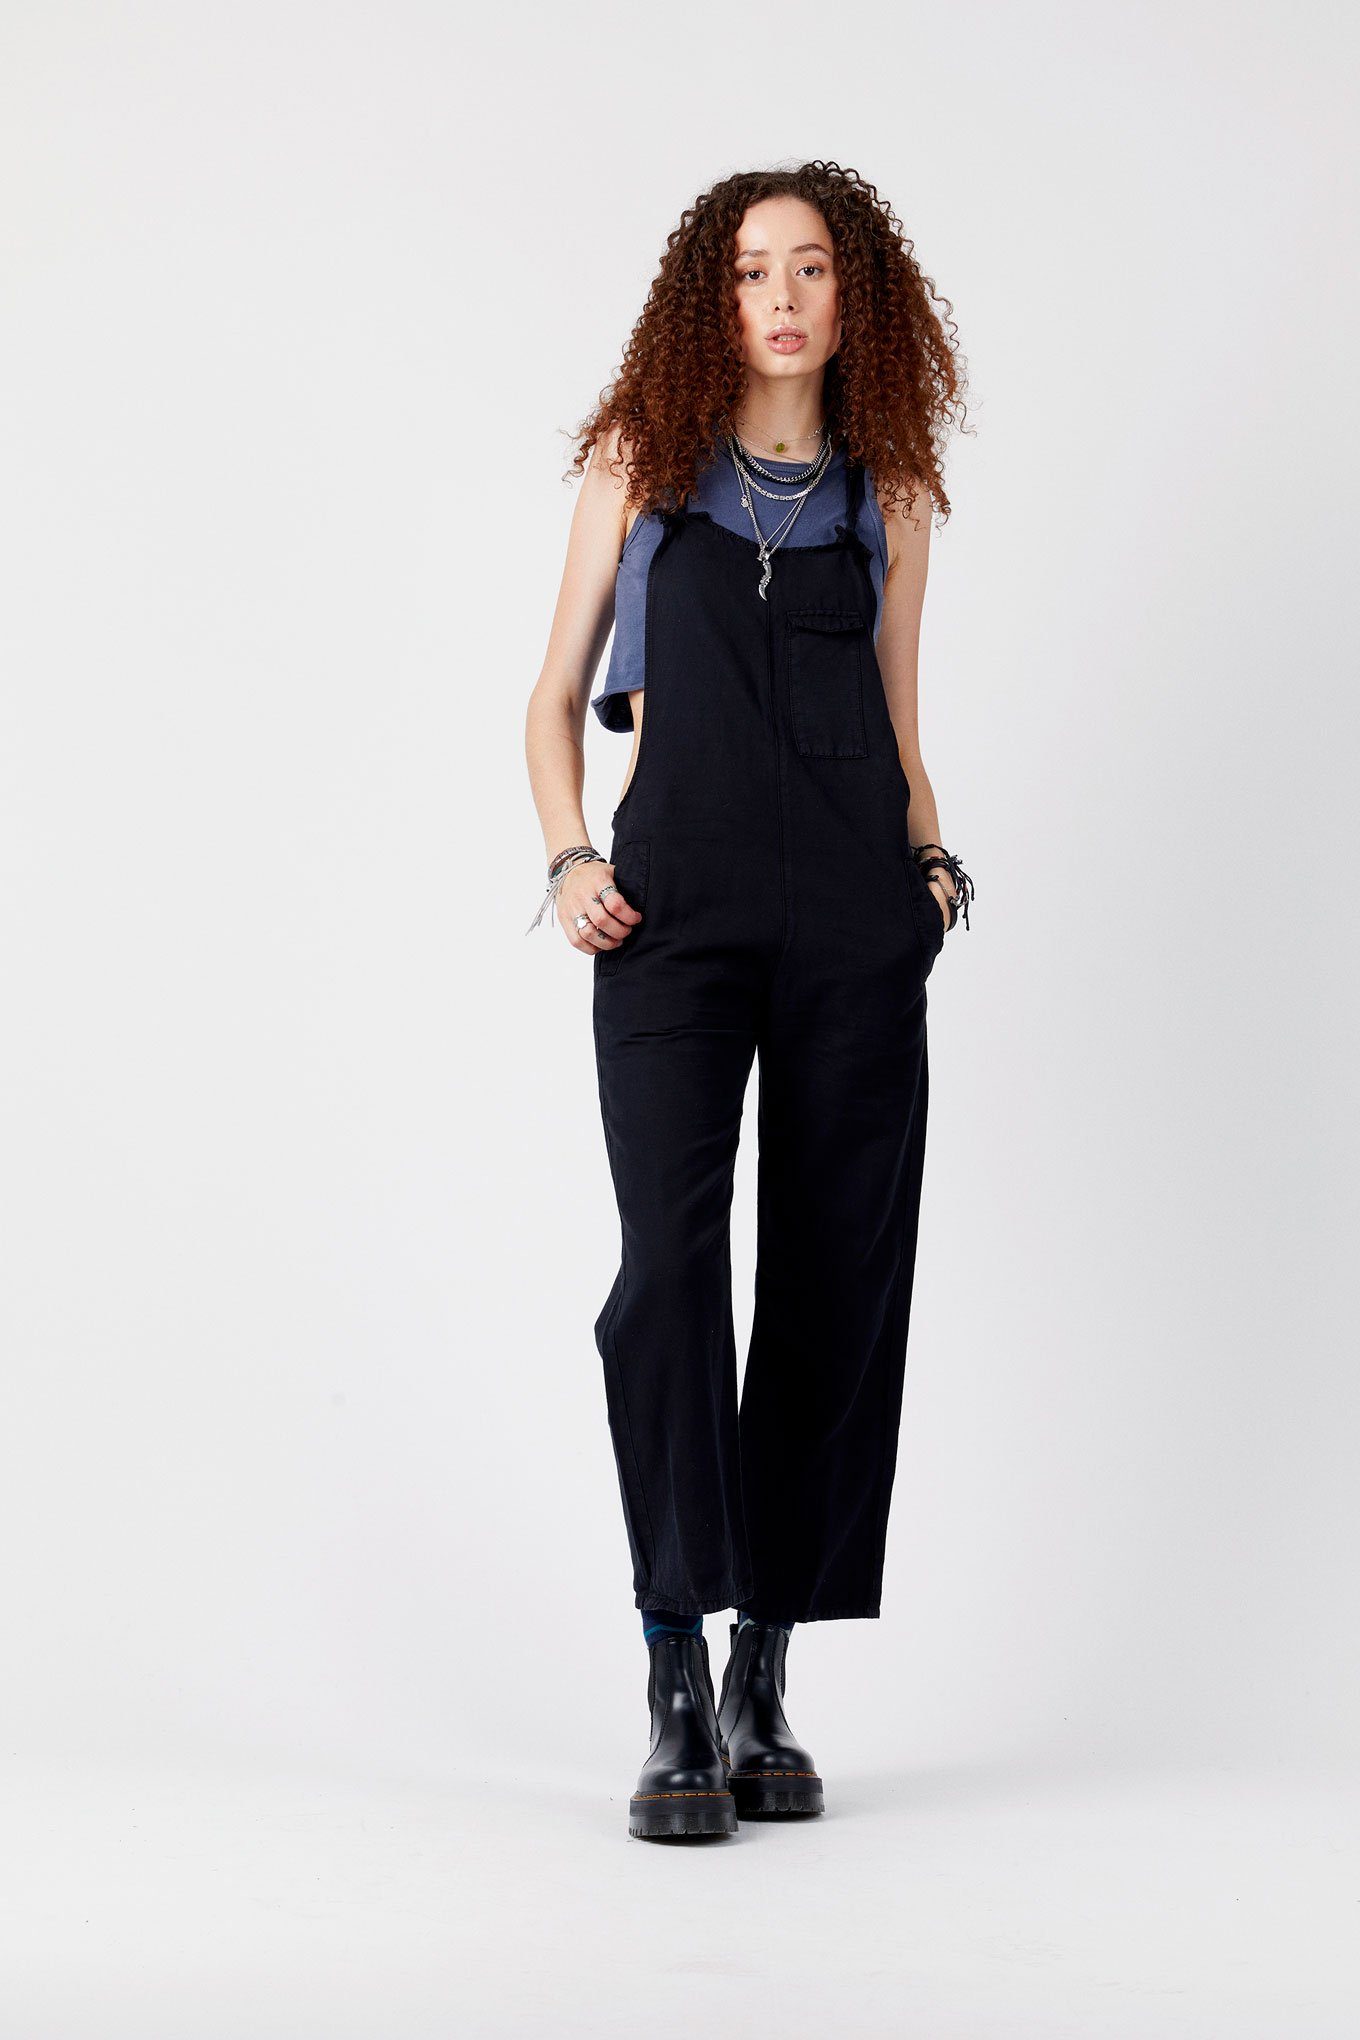 MARY-LOU Black - GOTS Organic Cotton Dungaress by Flax & Loom, SIZE 2 / UK 10 / EUR 38